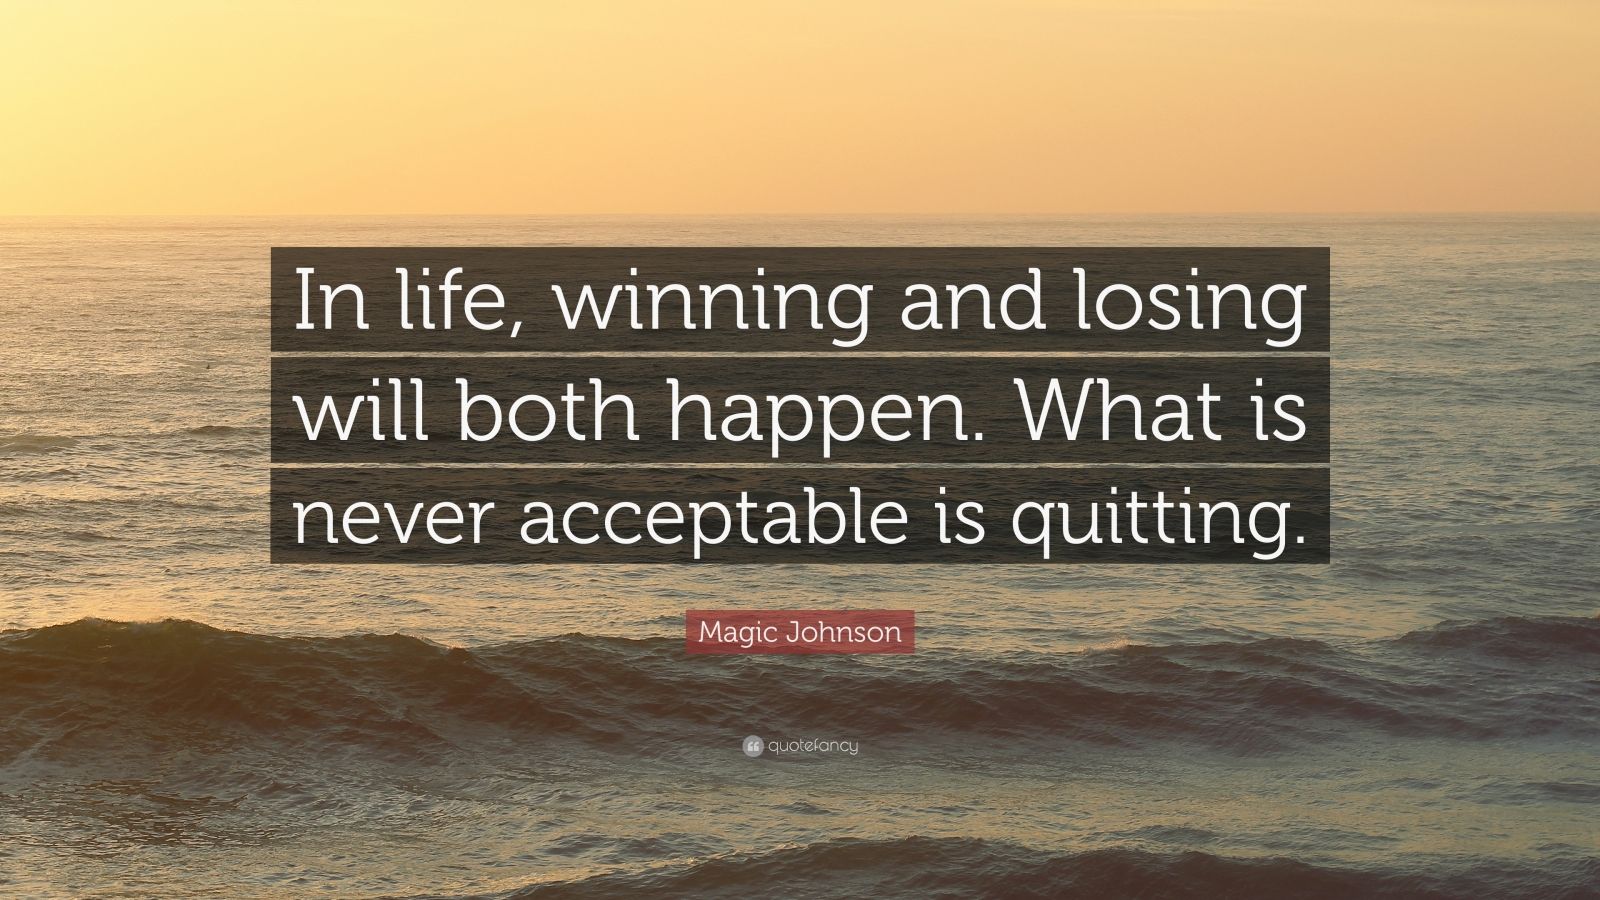 Magic Johnson Quote: “In life, winning and losing will both happen